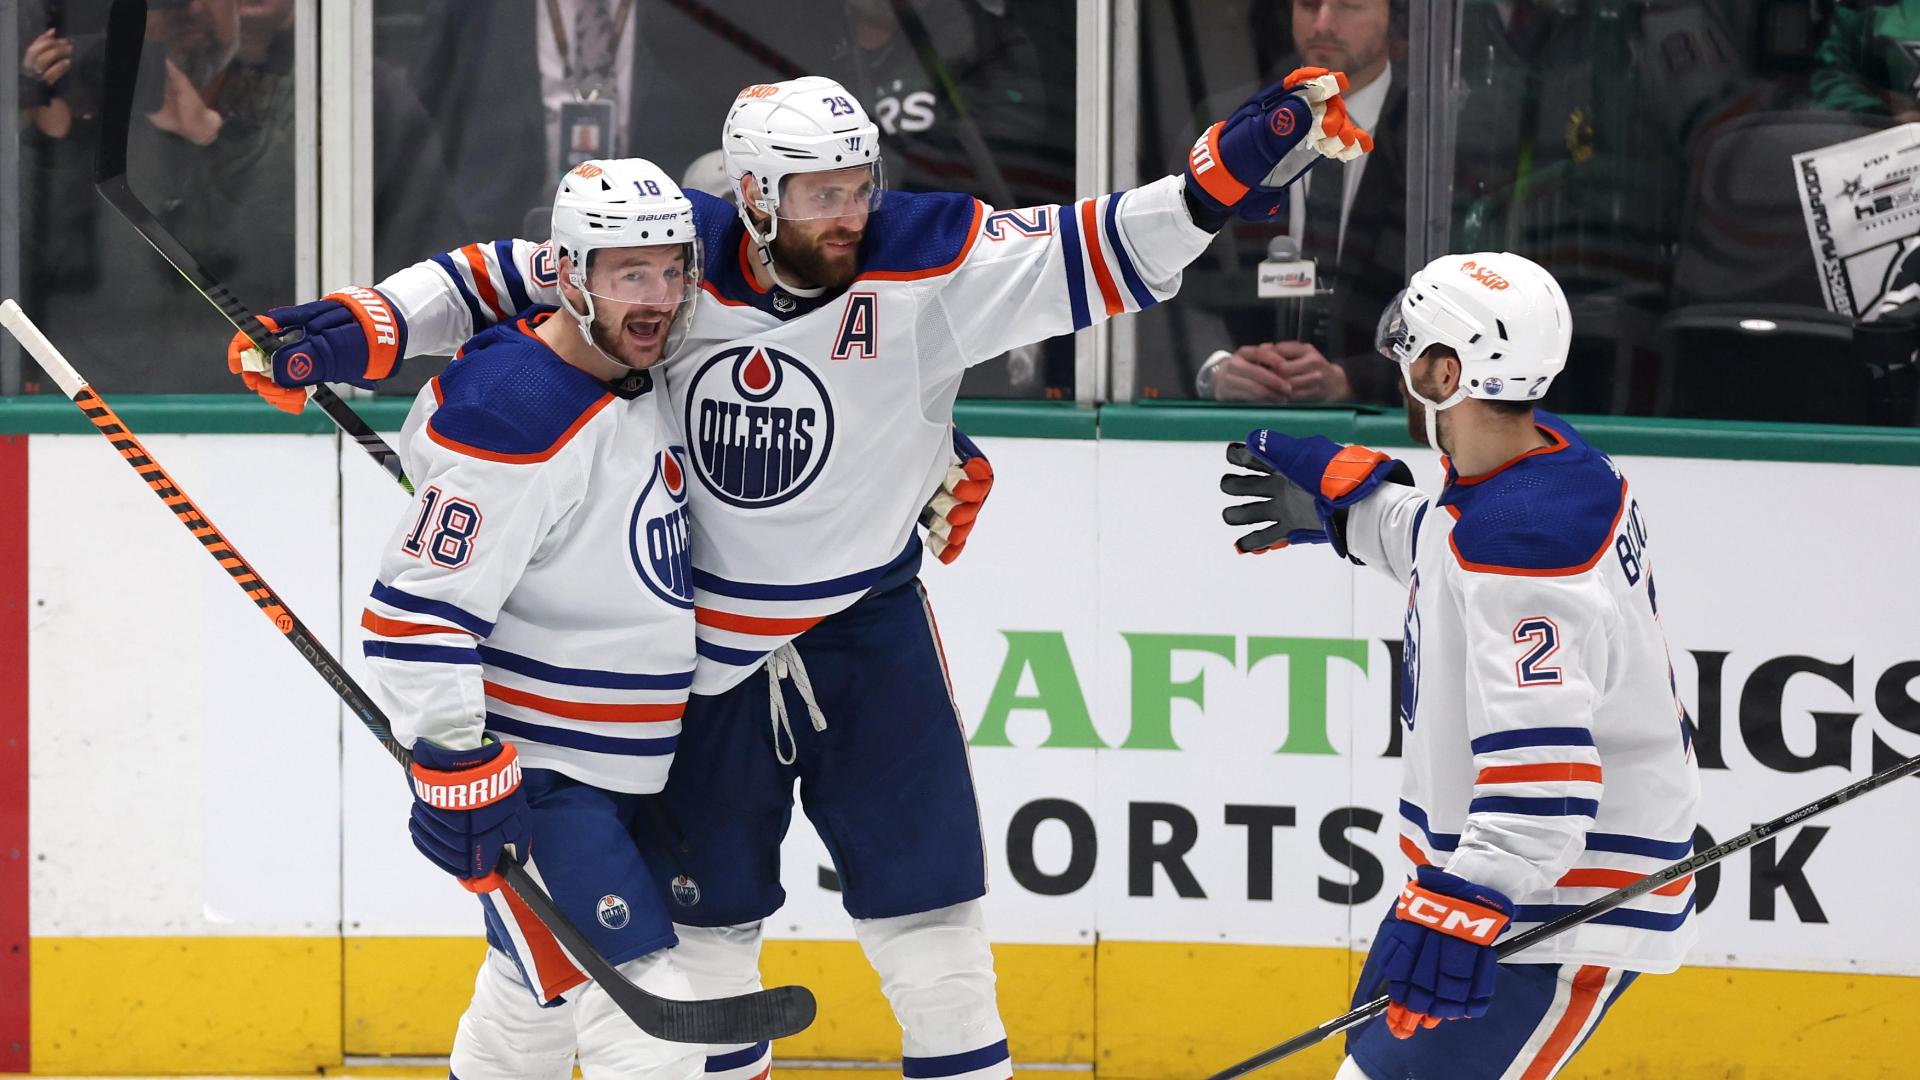 Leon Draisaitl makes it 1-0 Oilers early in second period